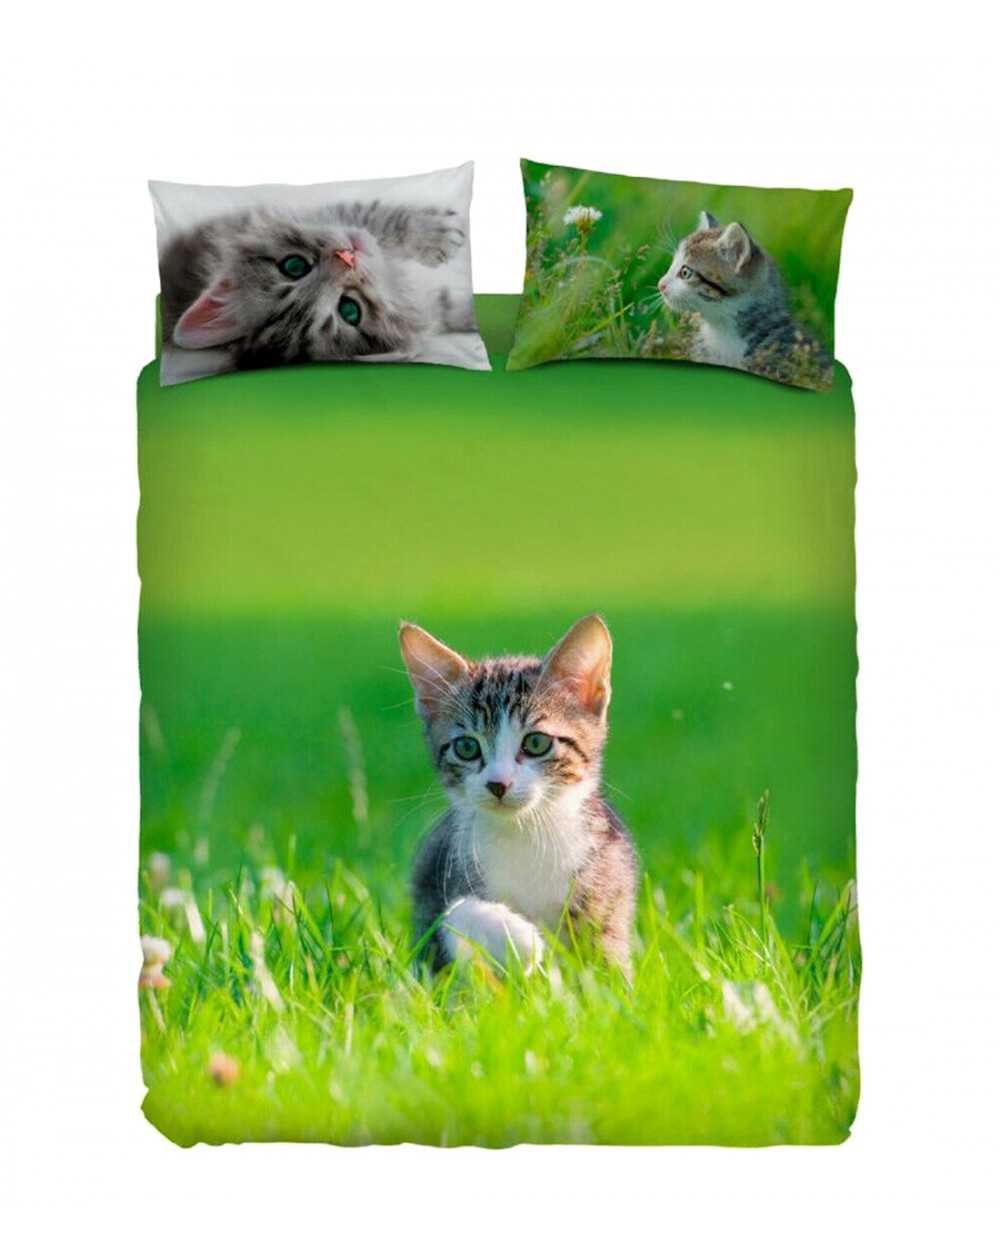 Duvet cover ,Fitted sheet with elasticated corner CAT LIFE SINGLE